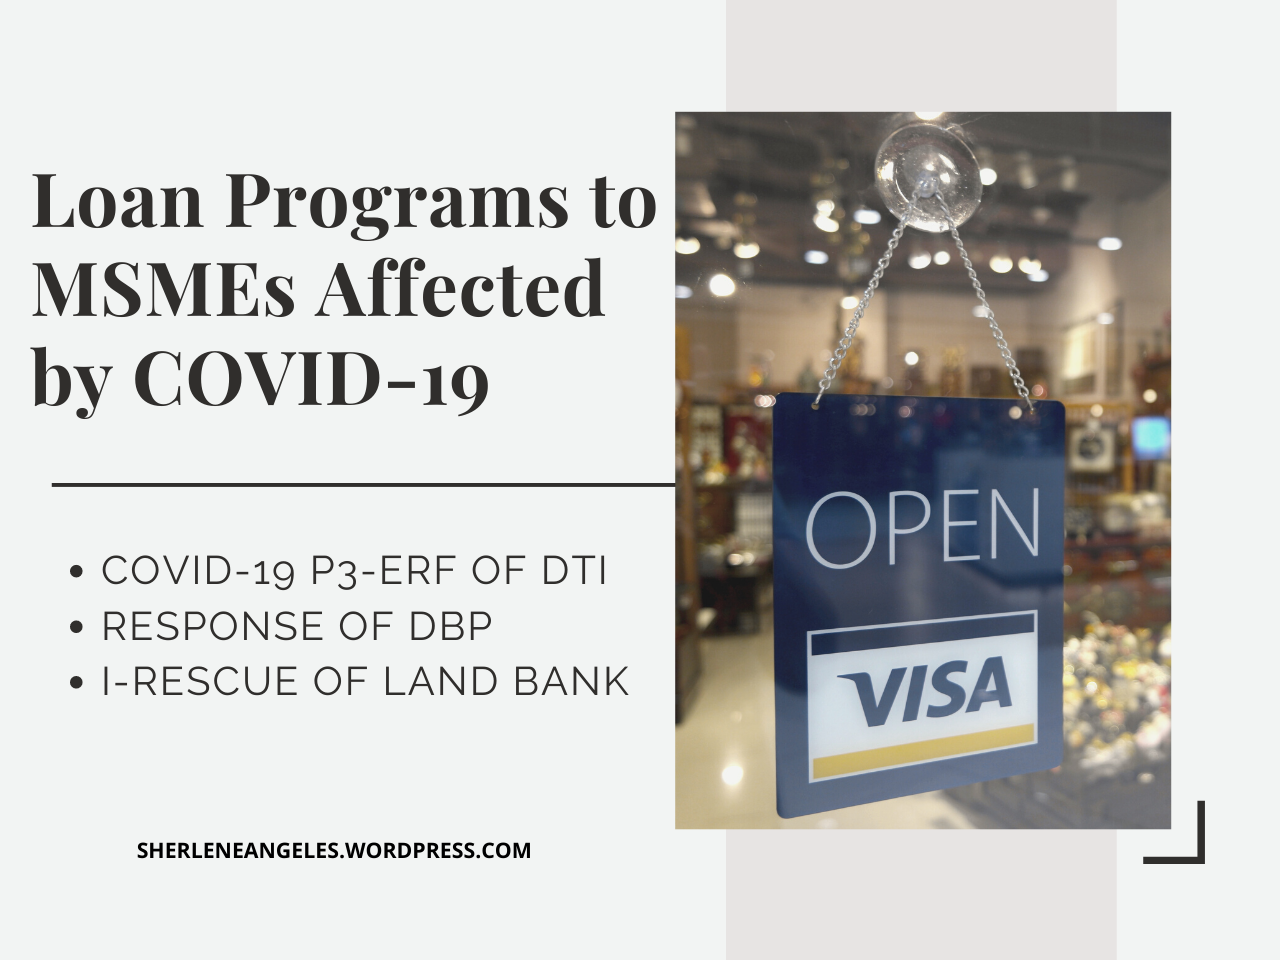 Loan Programs to MSMEs Affected by COVID-19 in the Philippines